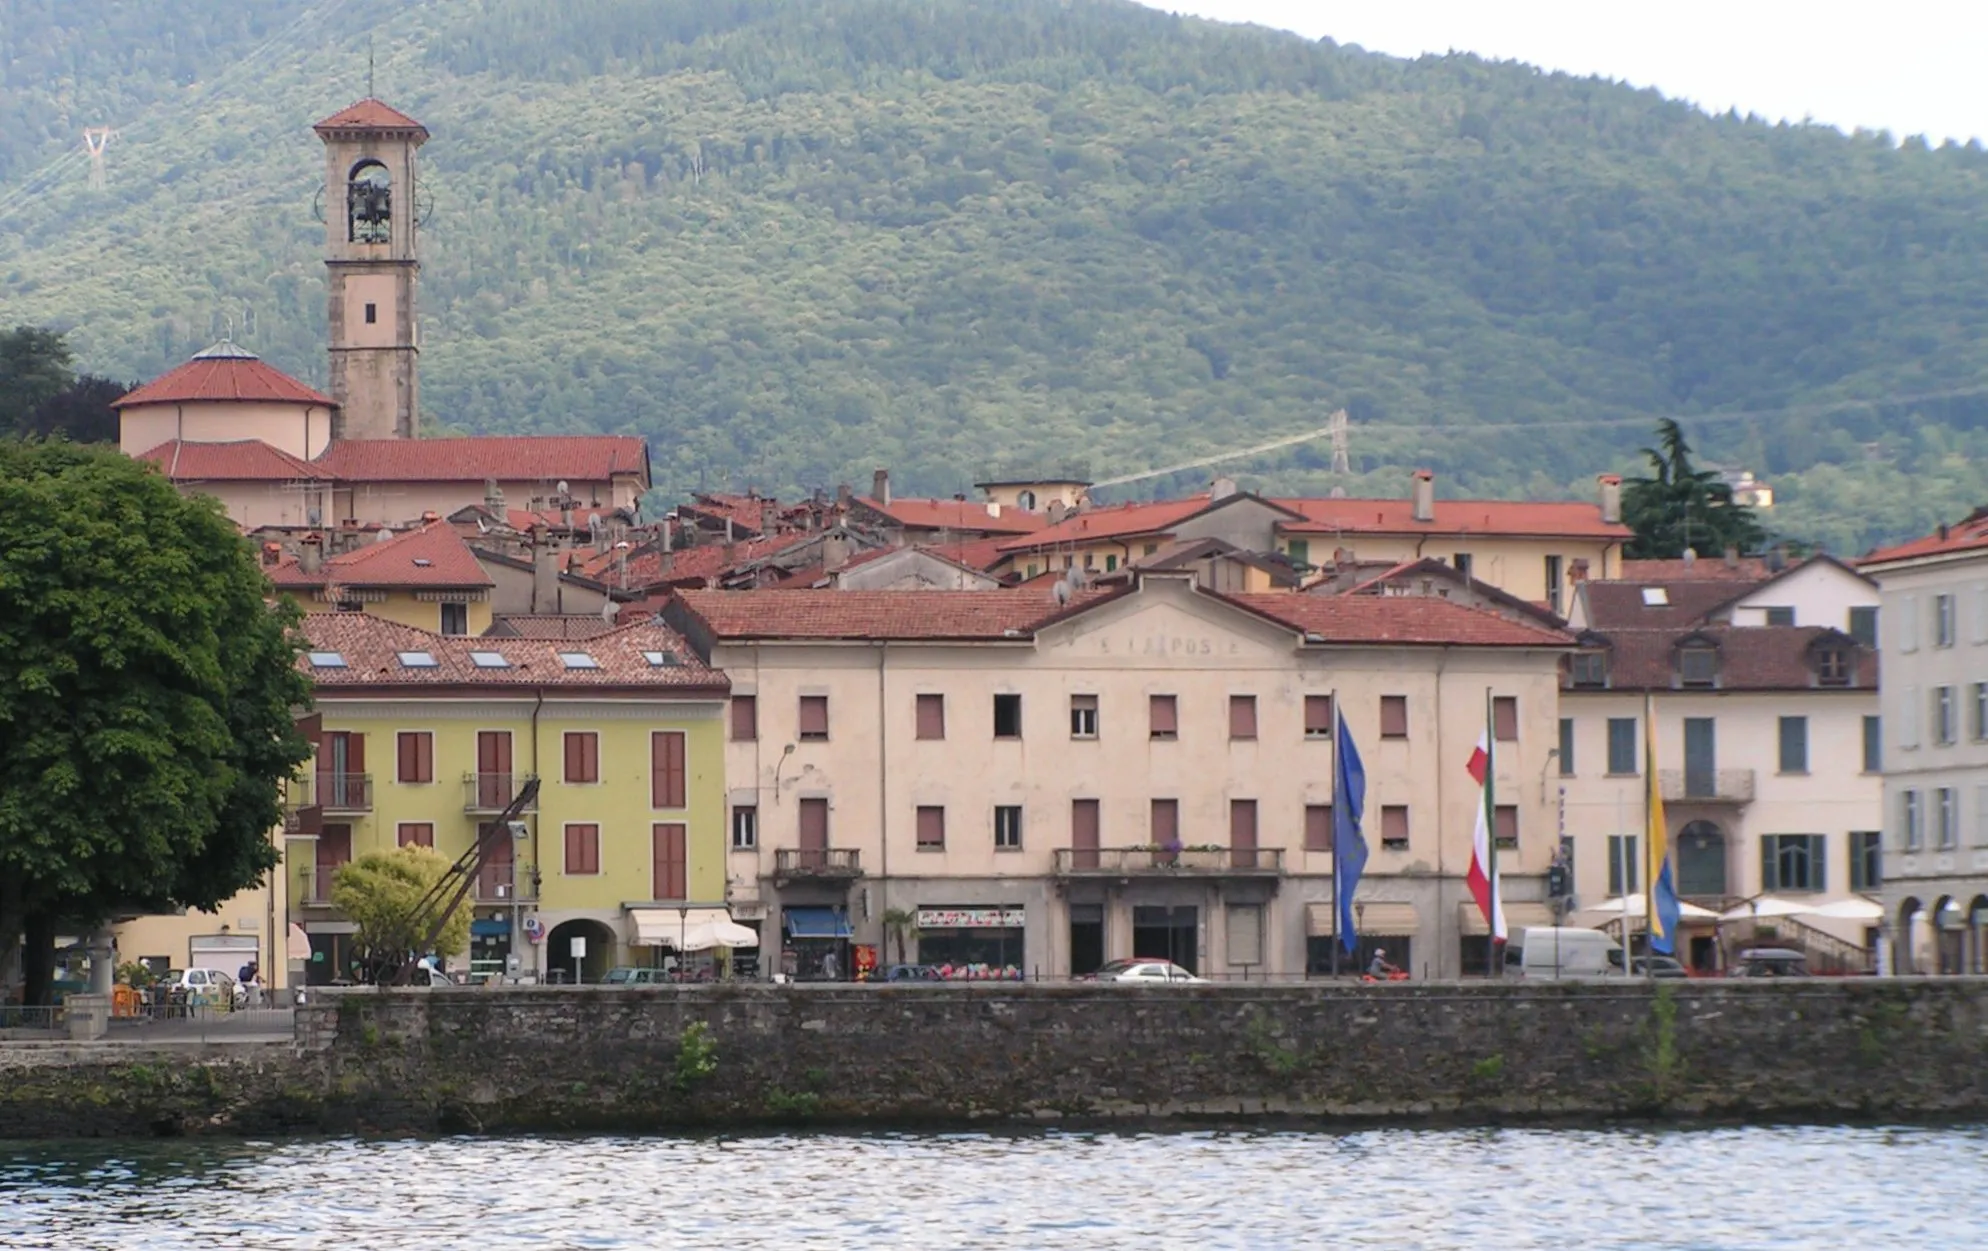 Photo showing: Luino's town centre, viewed from an excursion ship